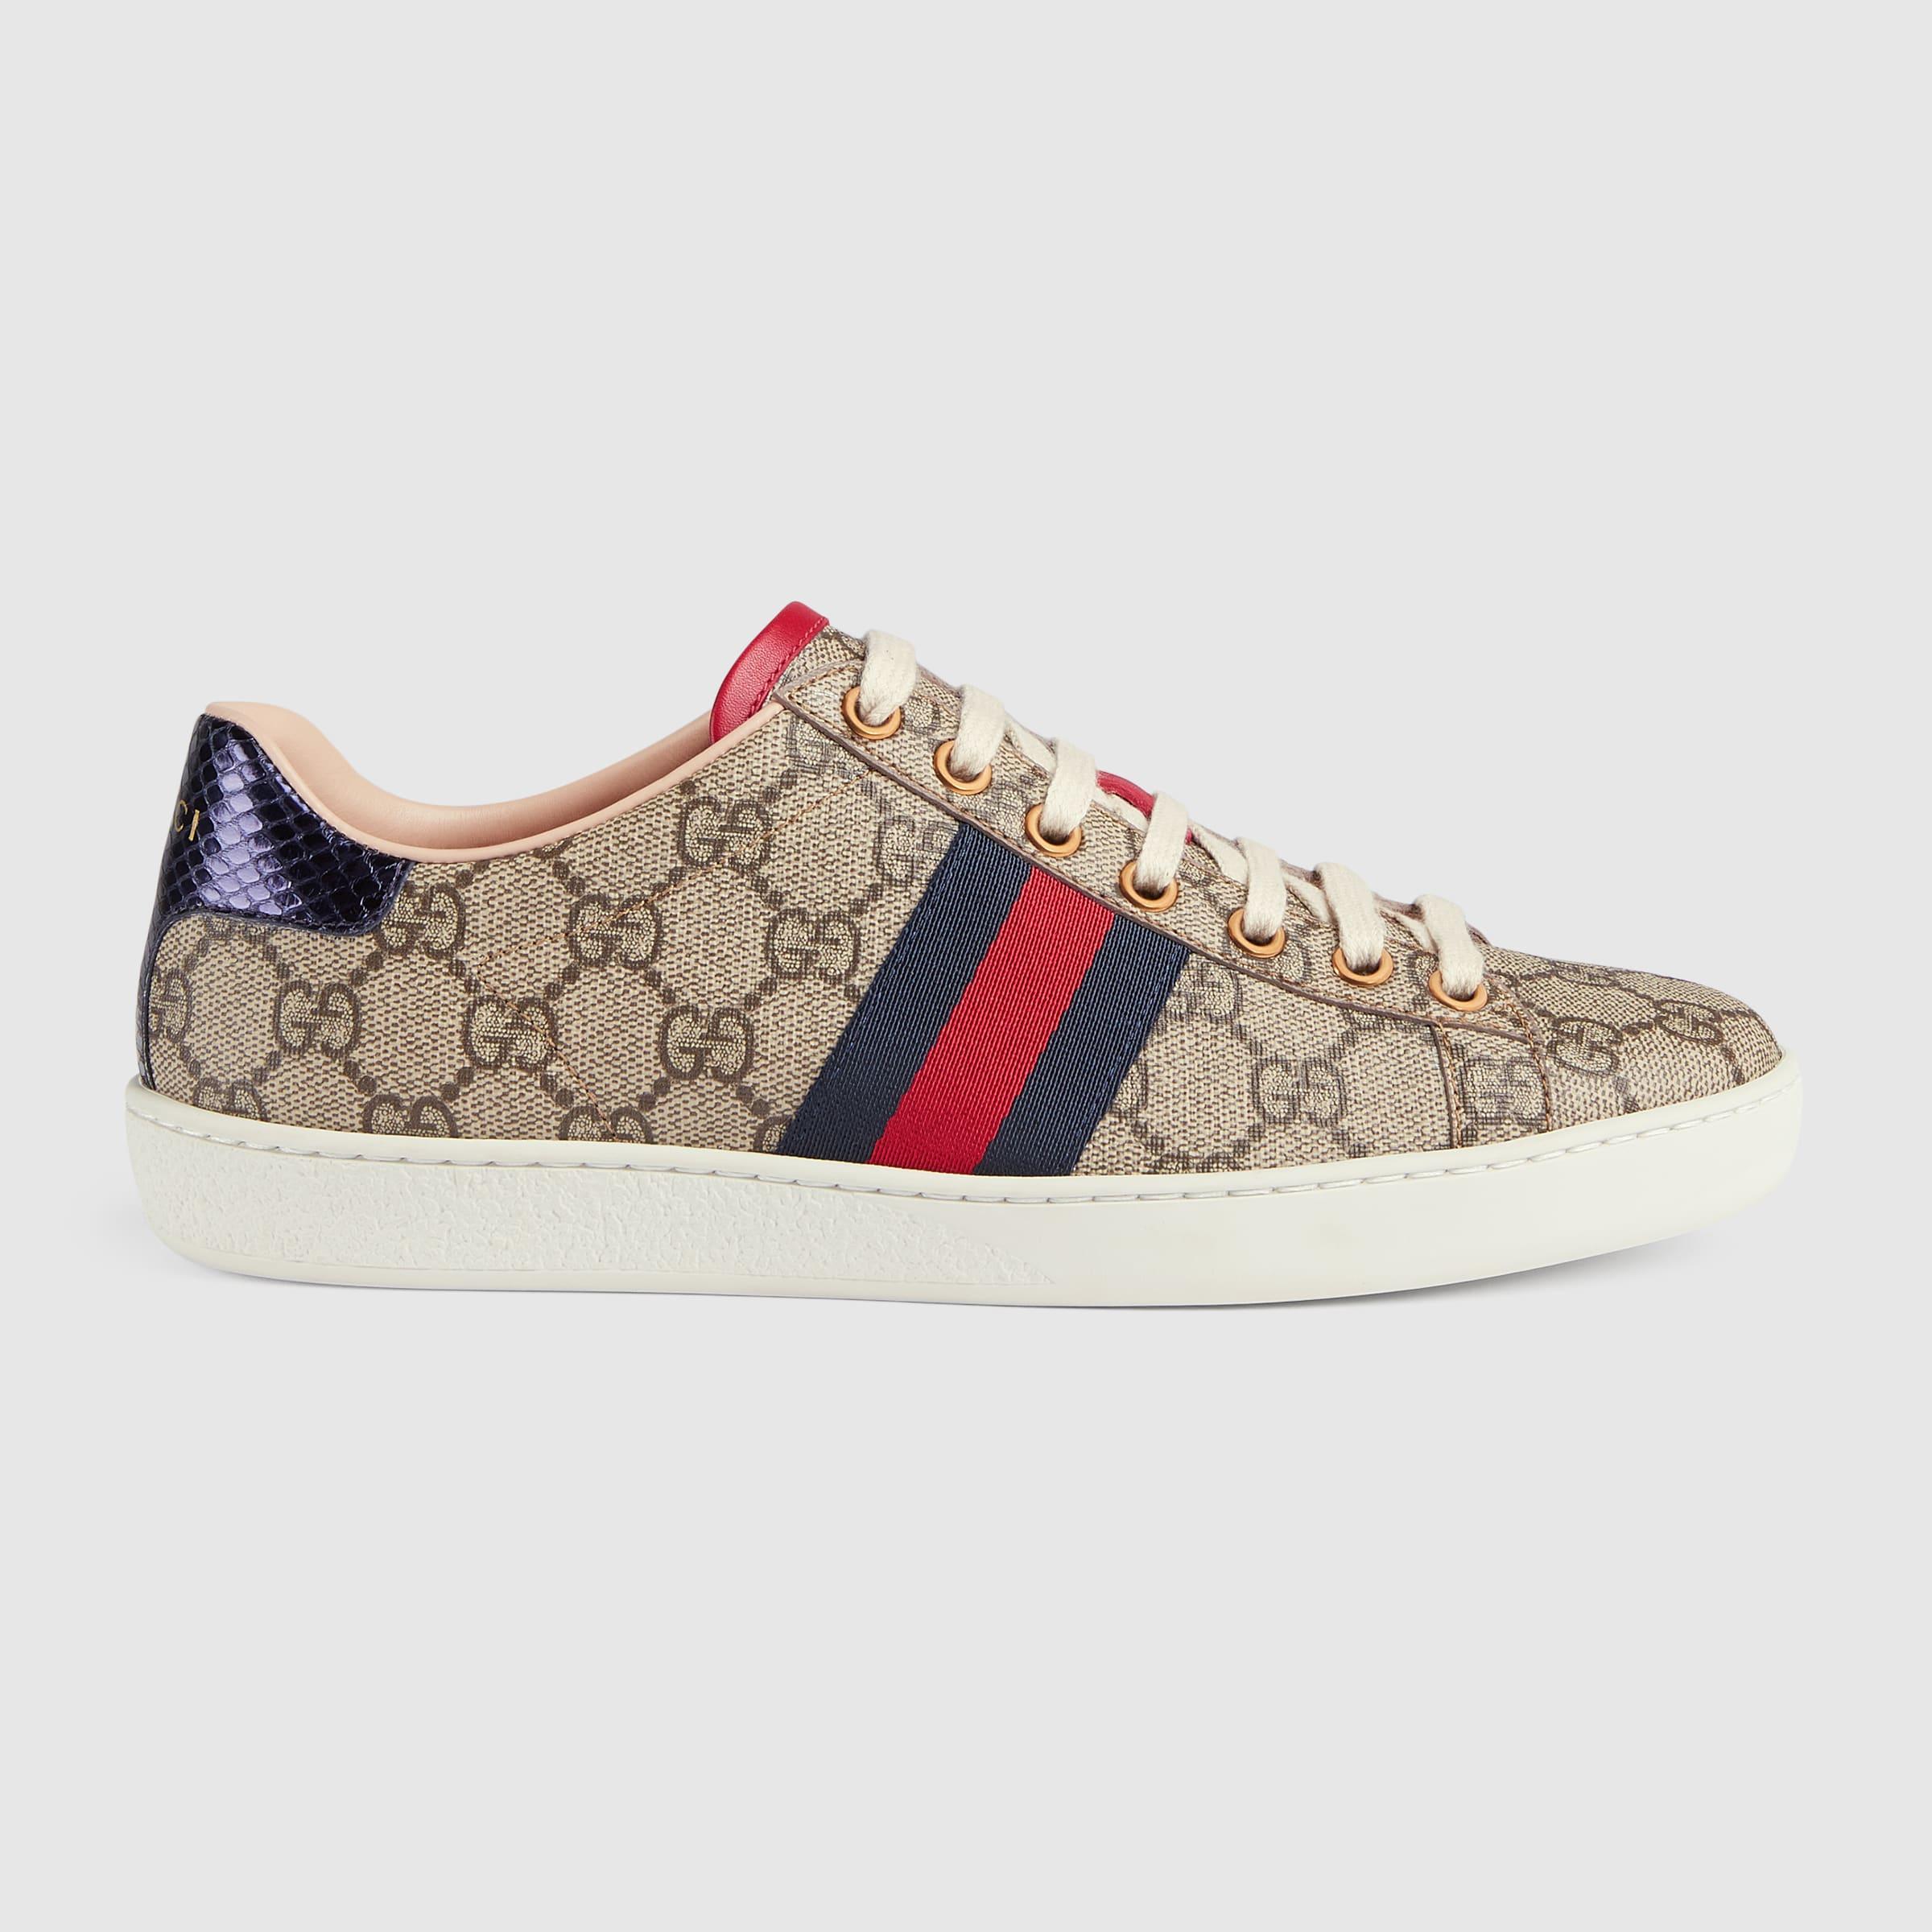 Gucci Ace GG Supreme Sneaker in Natural | Lyst